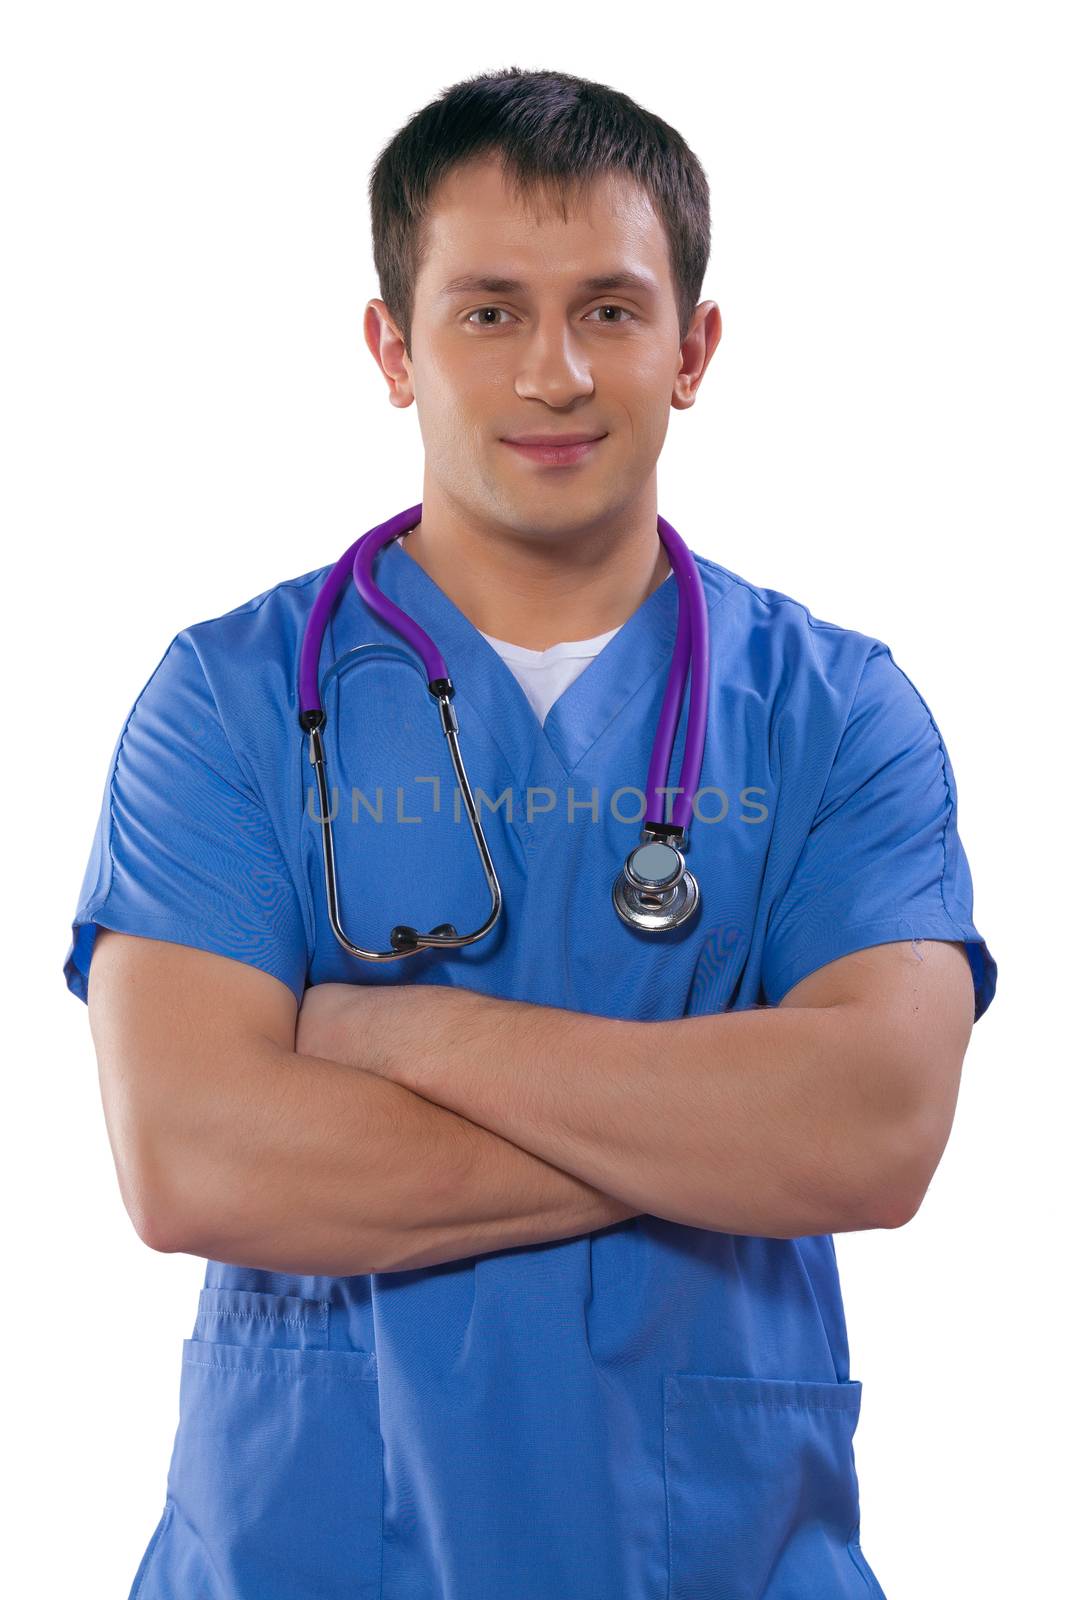 portrait of handsome doctor wearing blue uniform isolated on white background